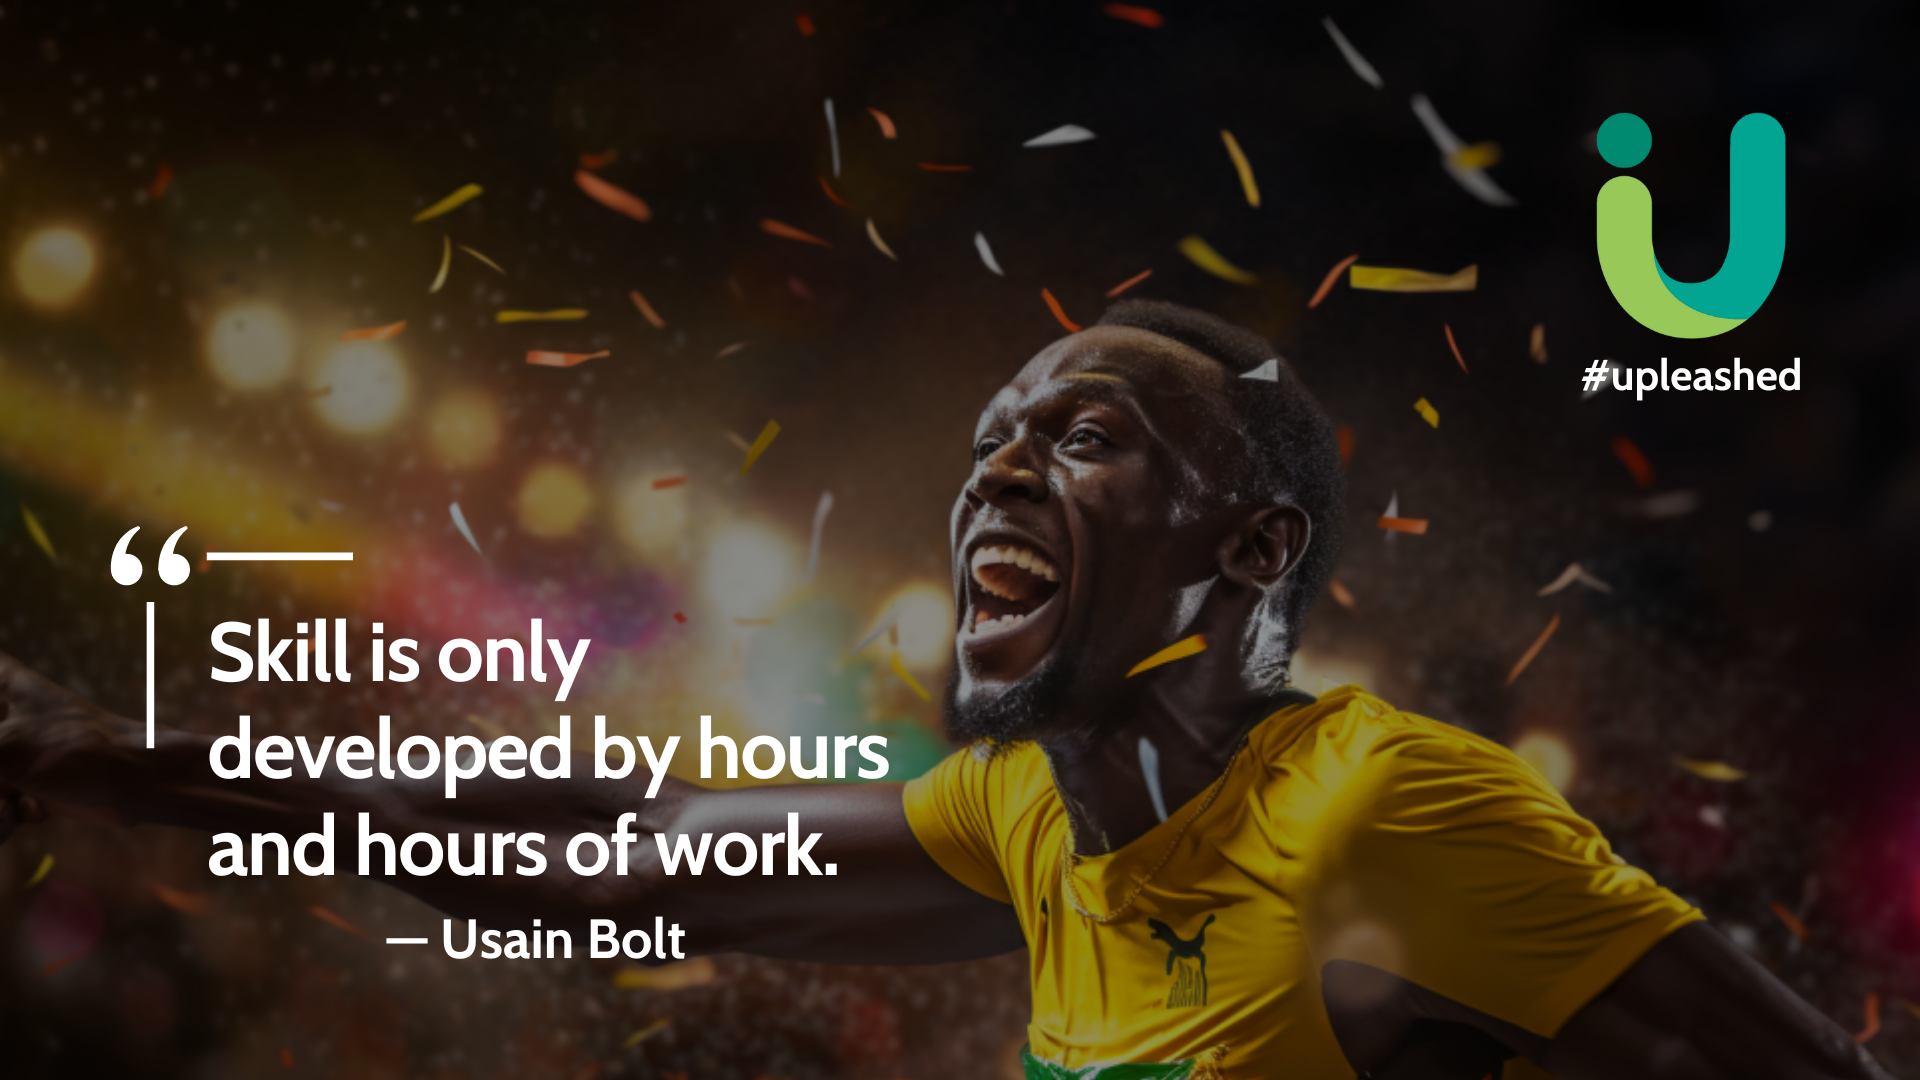 Skill is only developed by hours and hours of work — Usain Bolt upleashed